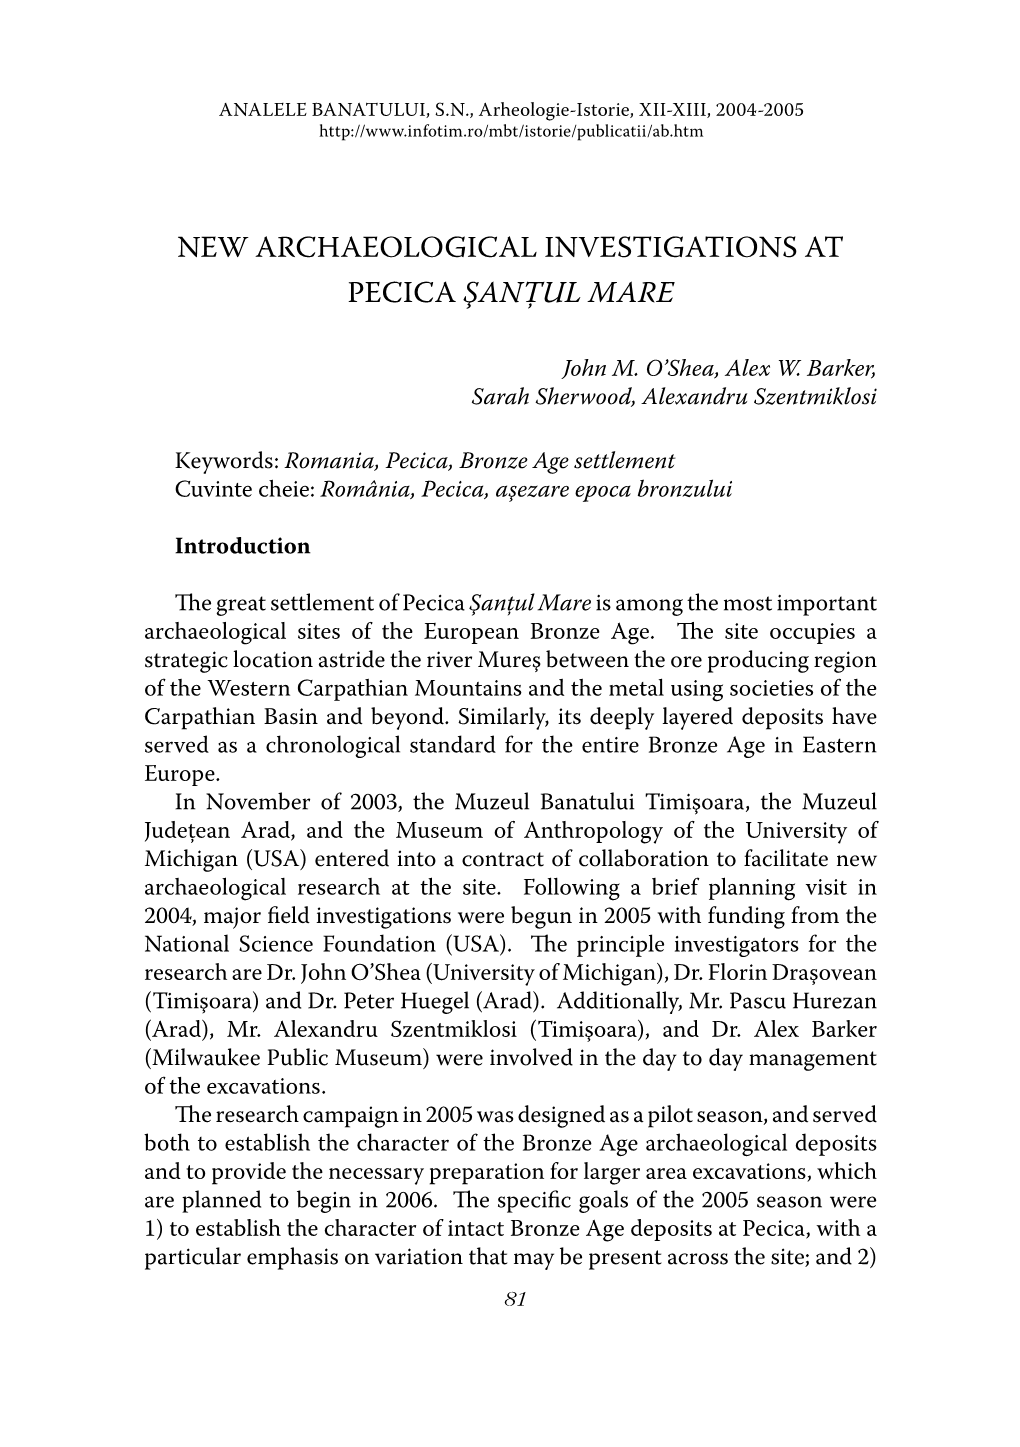 New Archaeological Investigations at Pecica Şanţul Mare